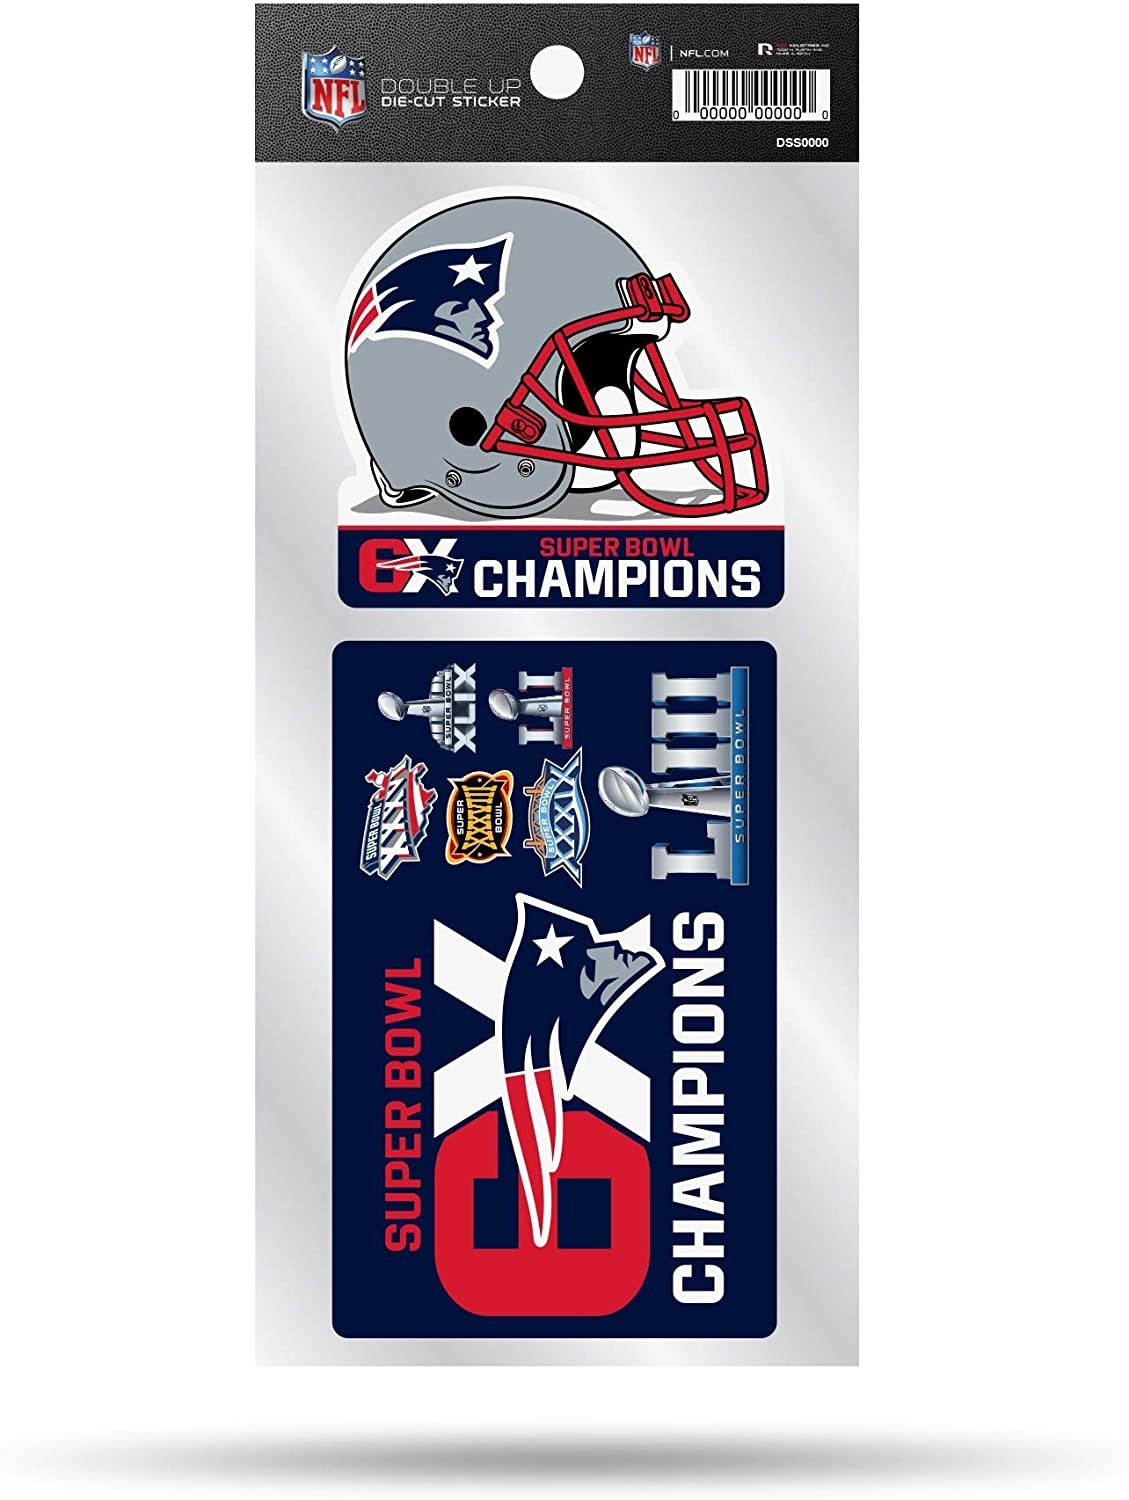 New England Patriots 6-Time Champions 2-Piece Double Up Die Cut Sticker Decal Sheet, 4x8 Inch